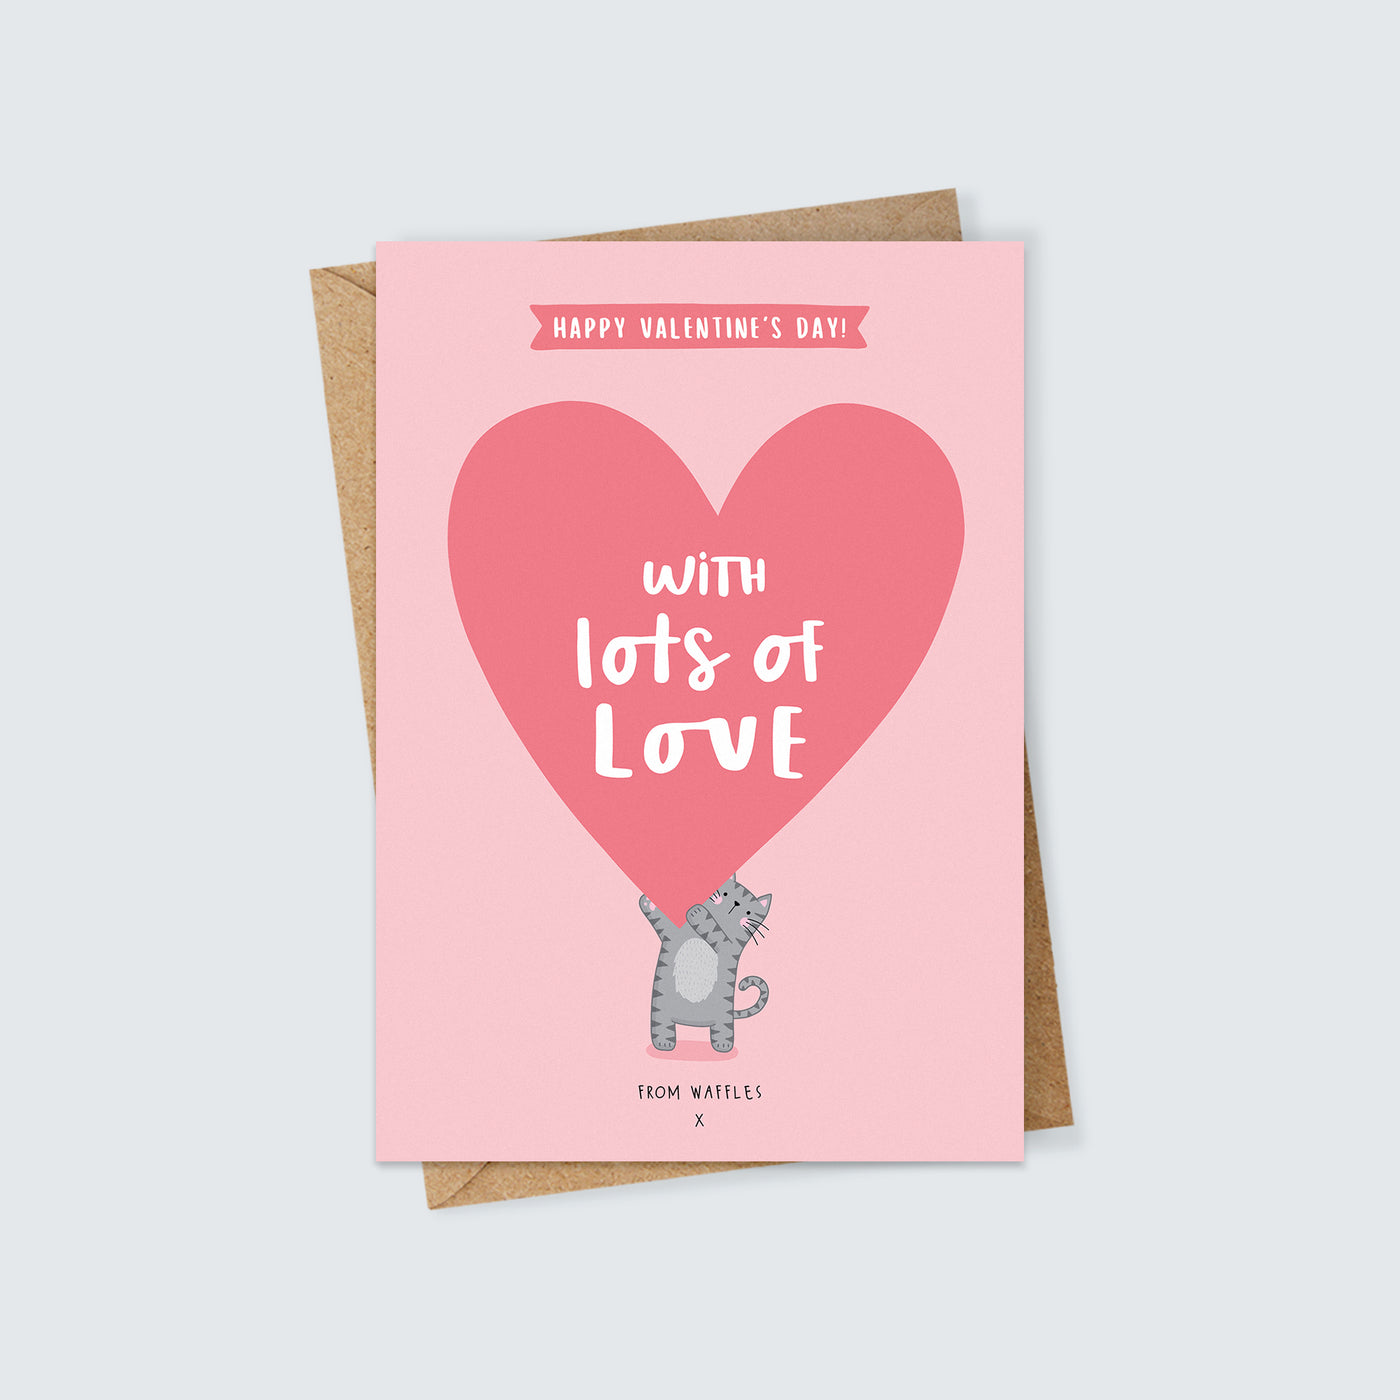 From the Cat Personalised Valentine's Day Card